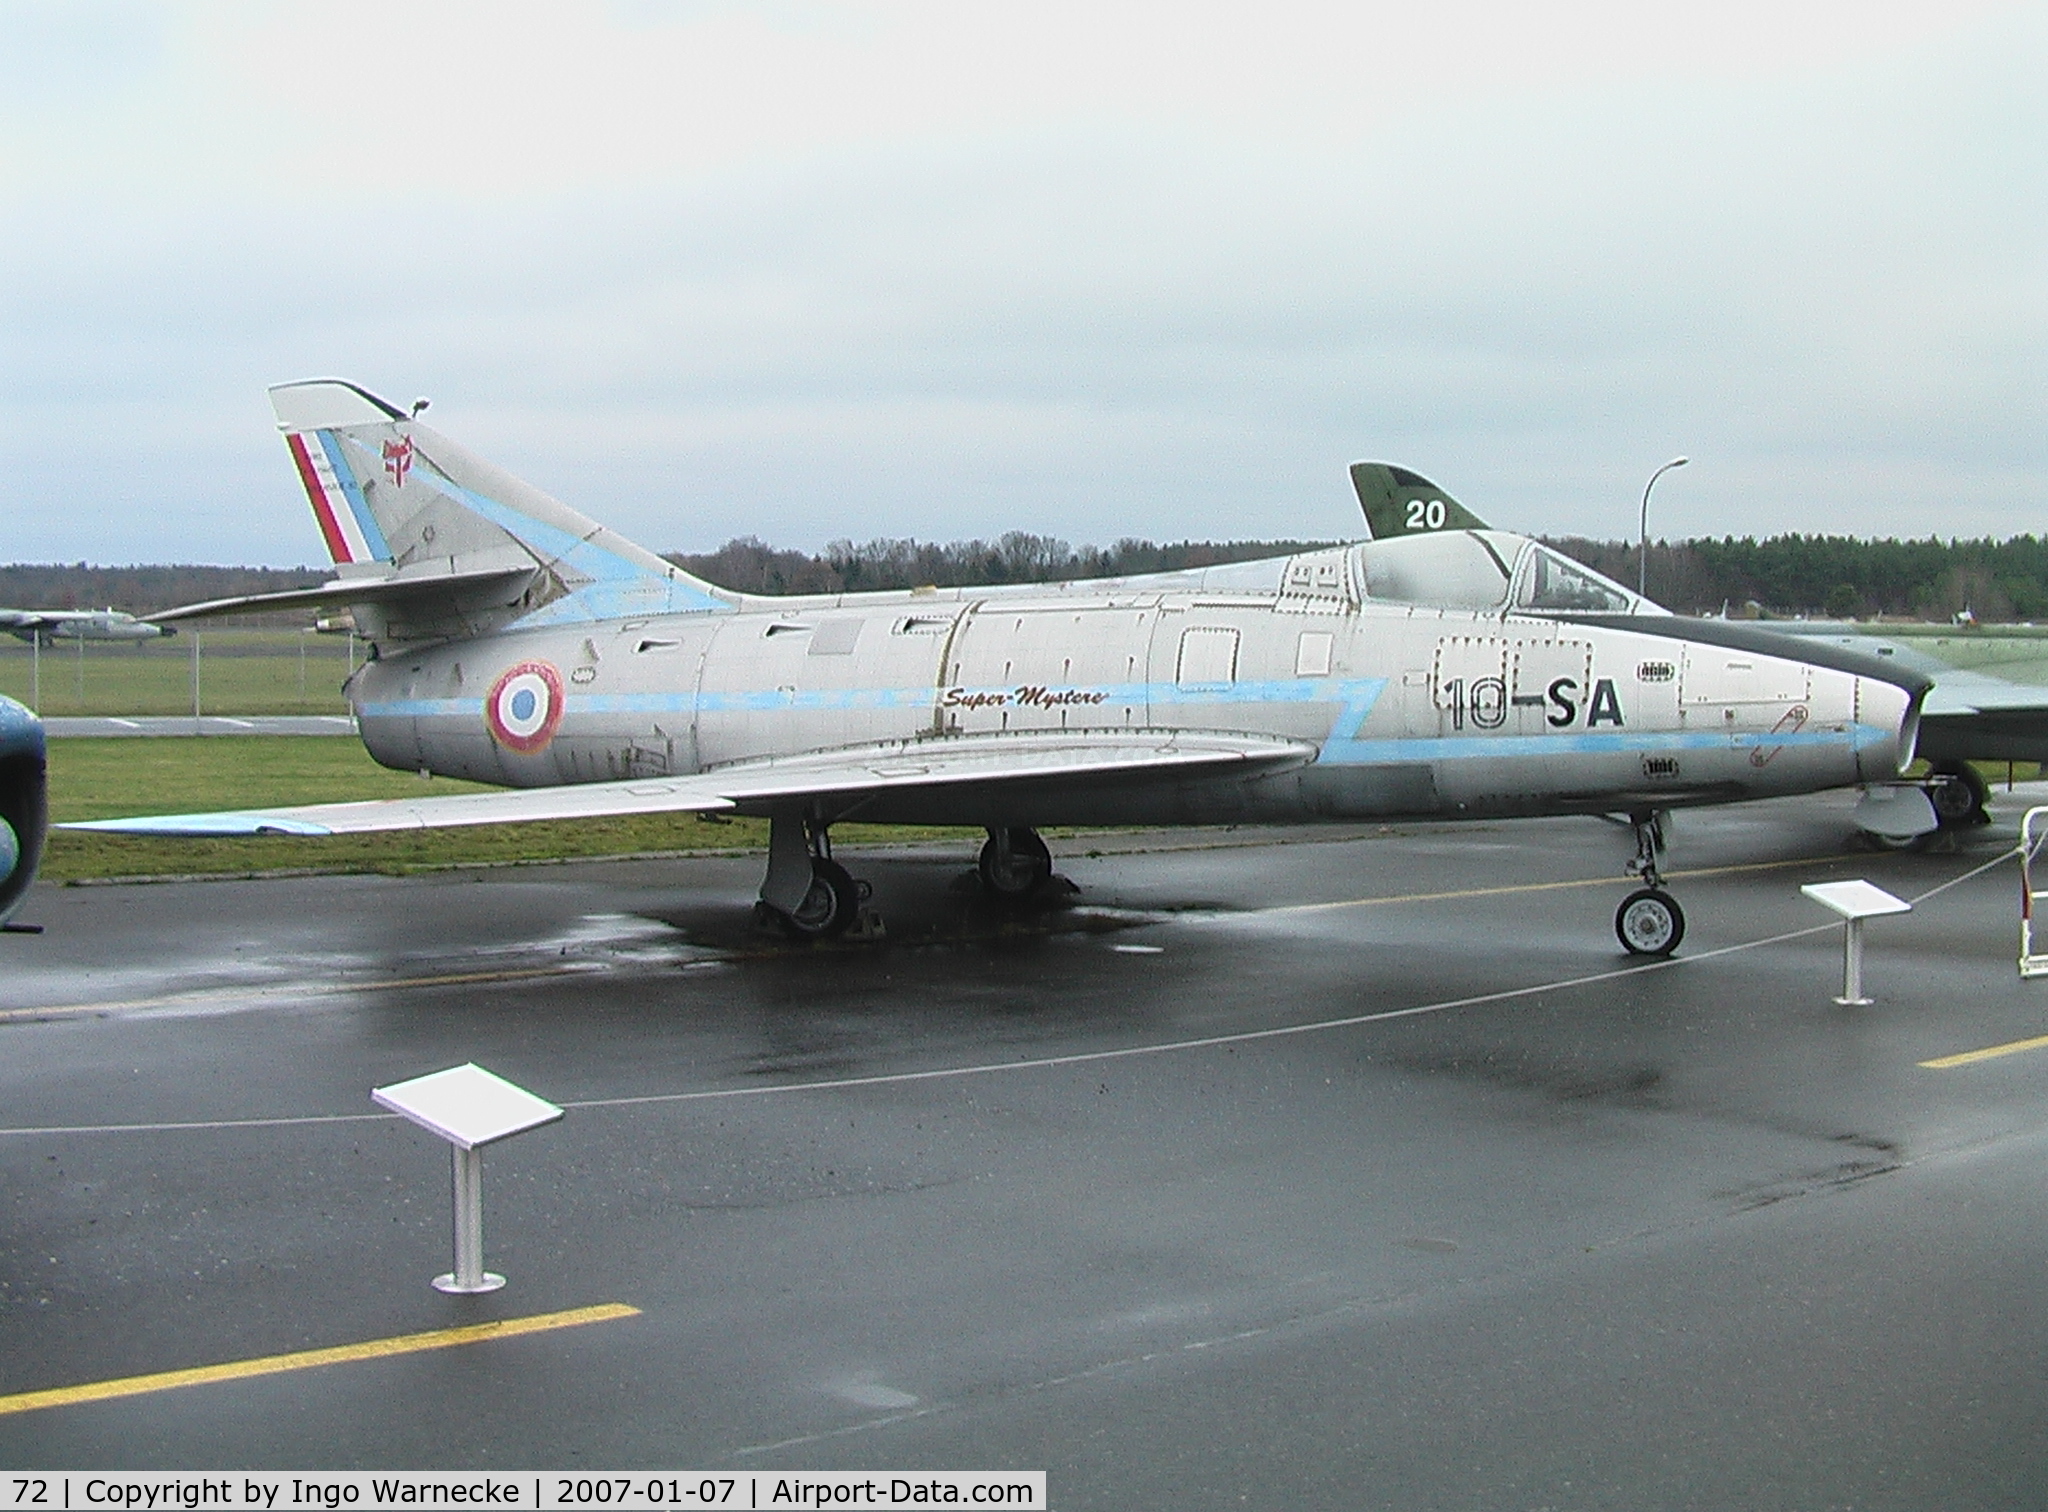 72, Dassault Super Mystere B.2 C/N 72, Dassault Super Mystere B.2 of the French Air Force at the Luftwaffenmuseum, Berlin Gatow